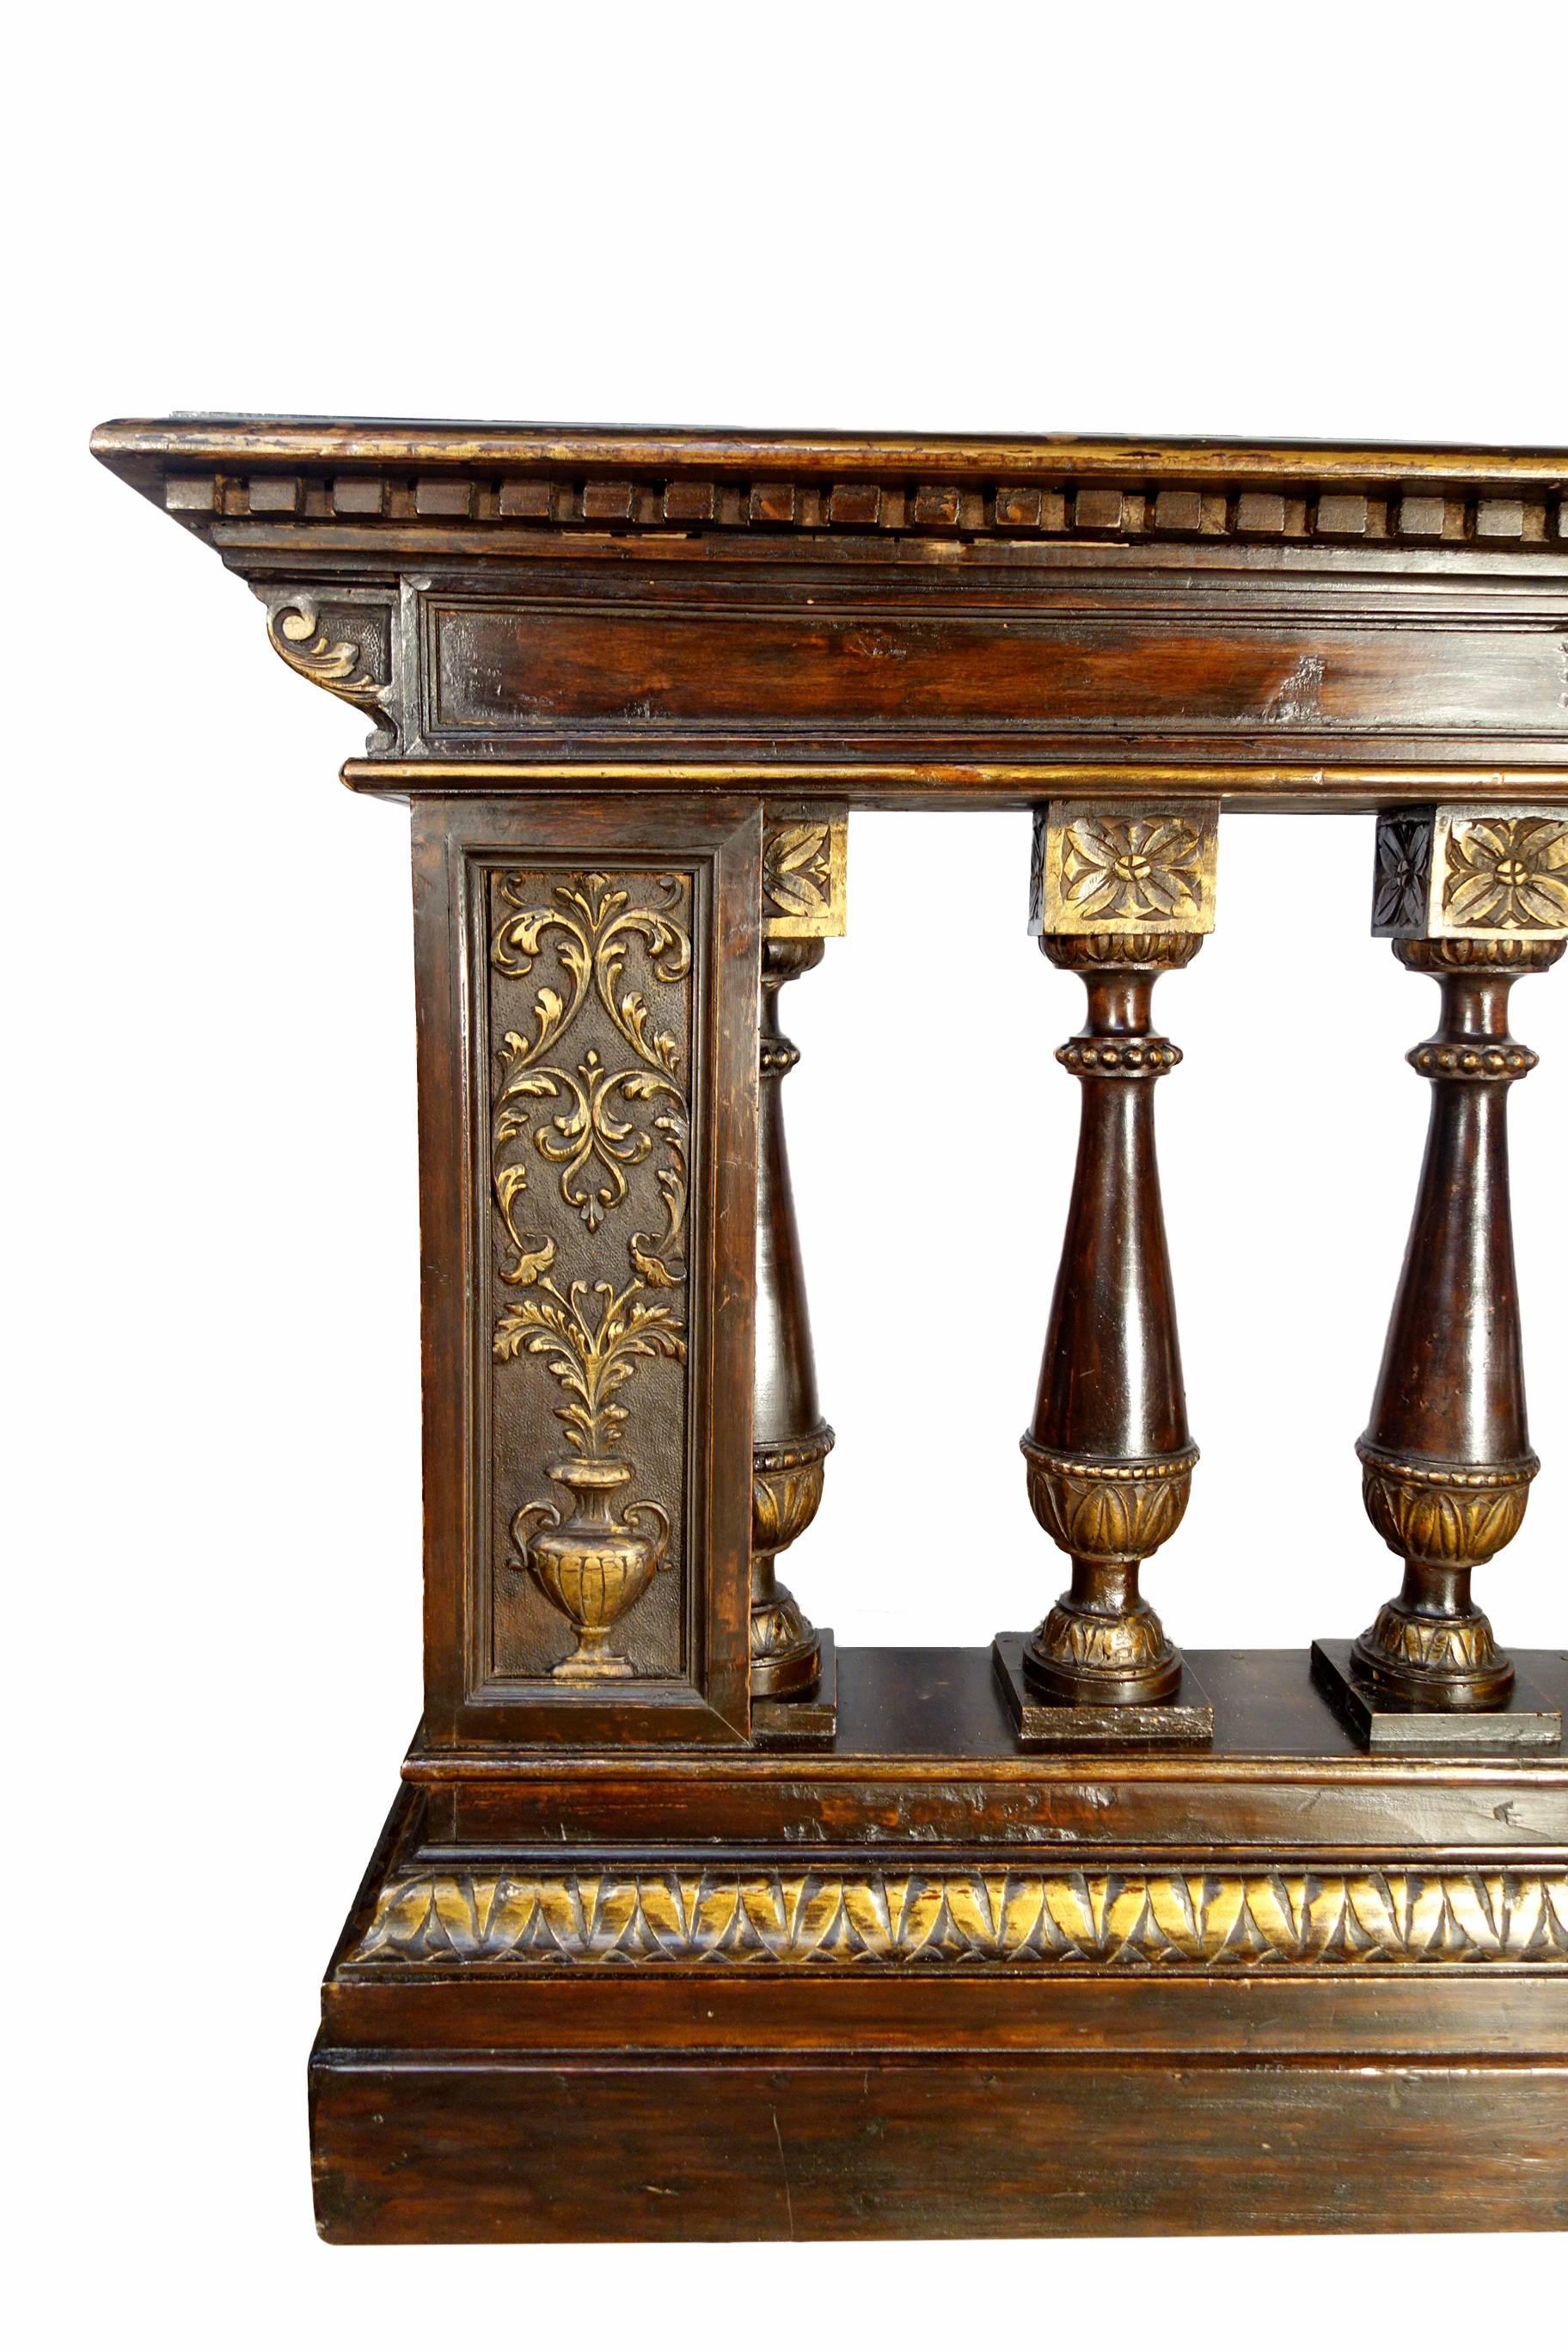 19th Century Italian Balustrade with Renaissance Carvings and Gold Gilt Ca 1850 1